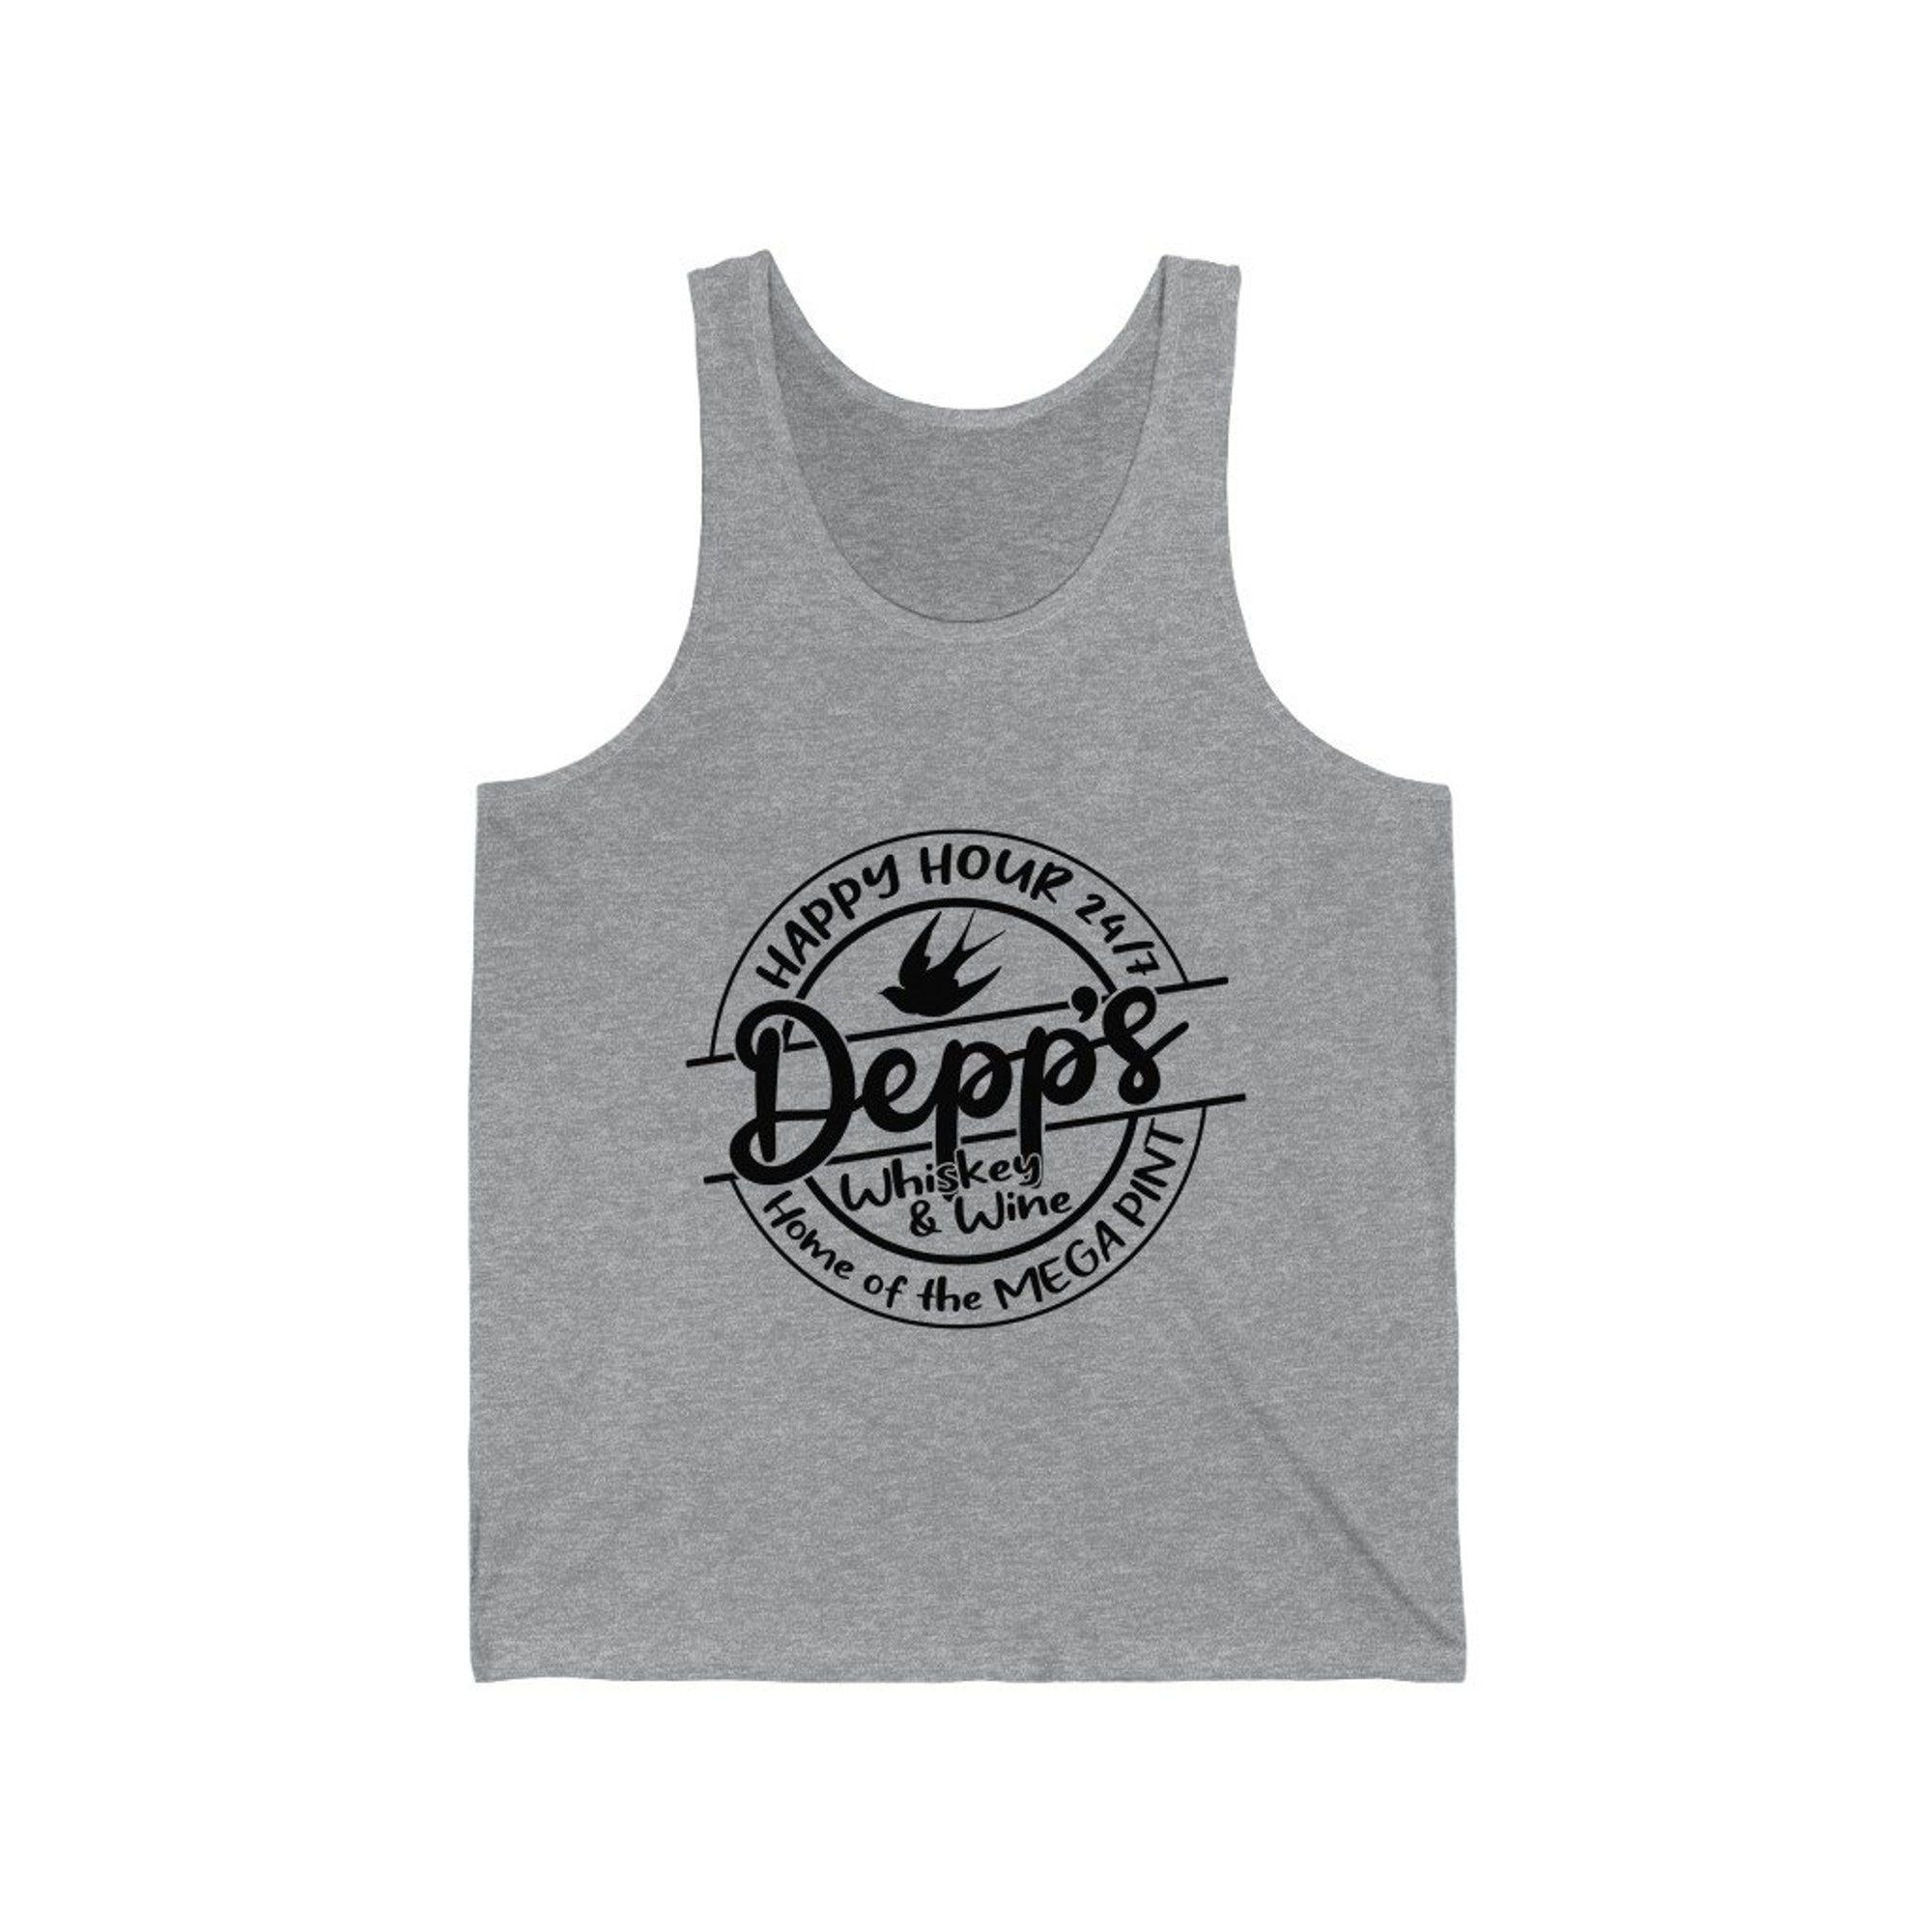 Discover Happy Hour Tank top